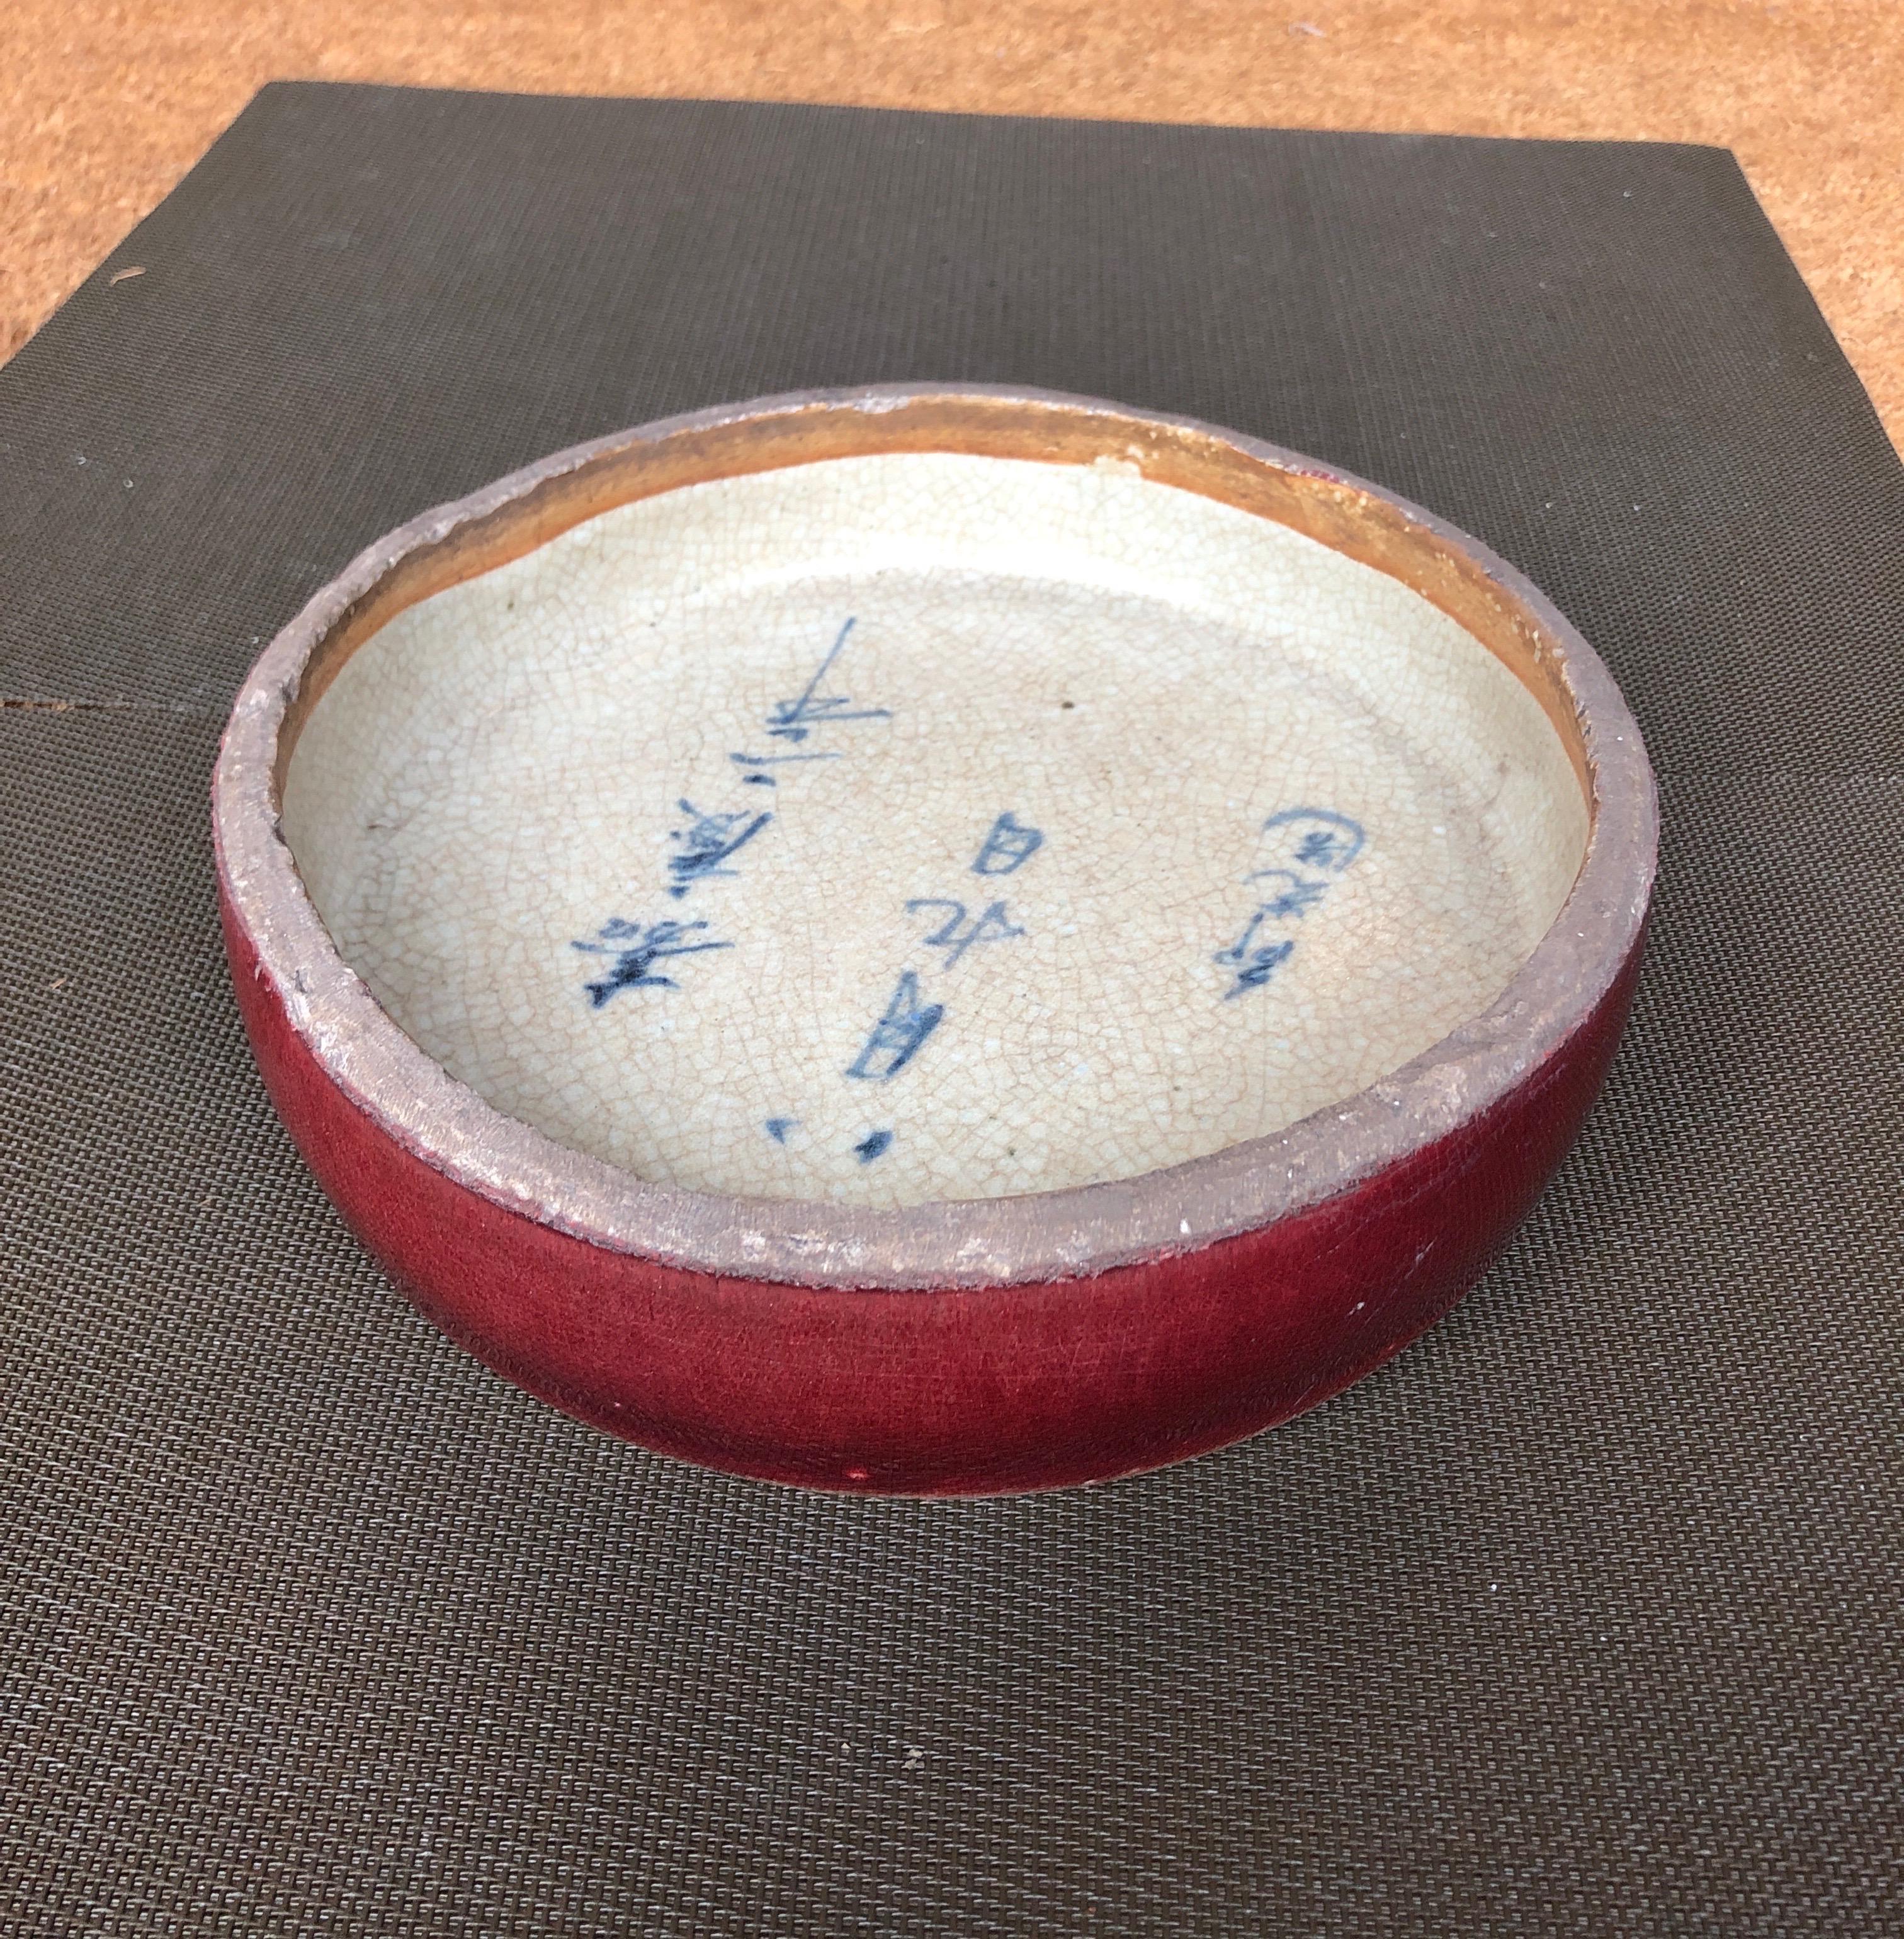 Antique Ceramic Brush Washer with Chinese Calligraphy and Striking Red Accent 4